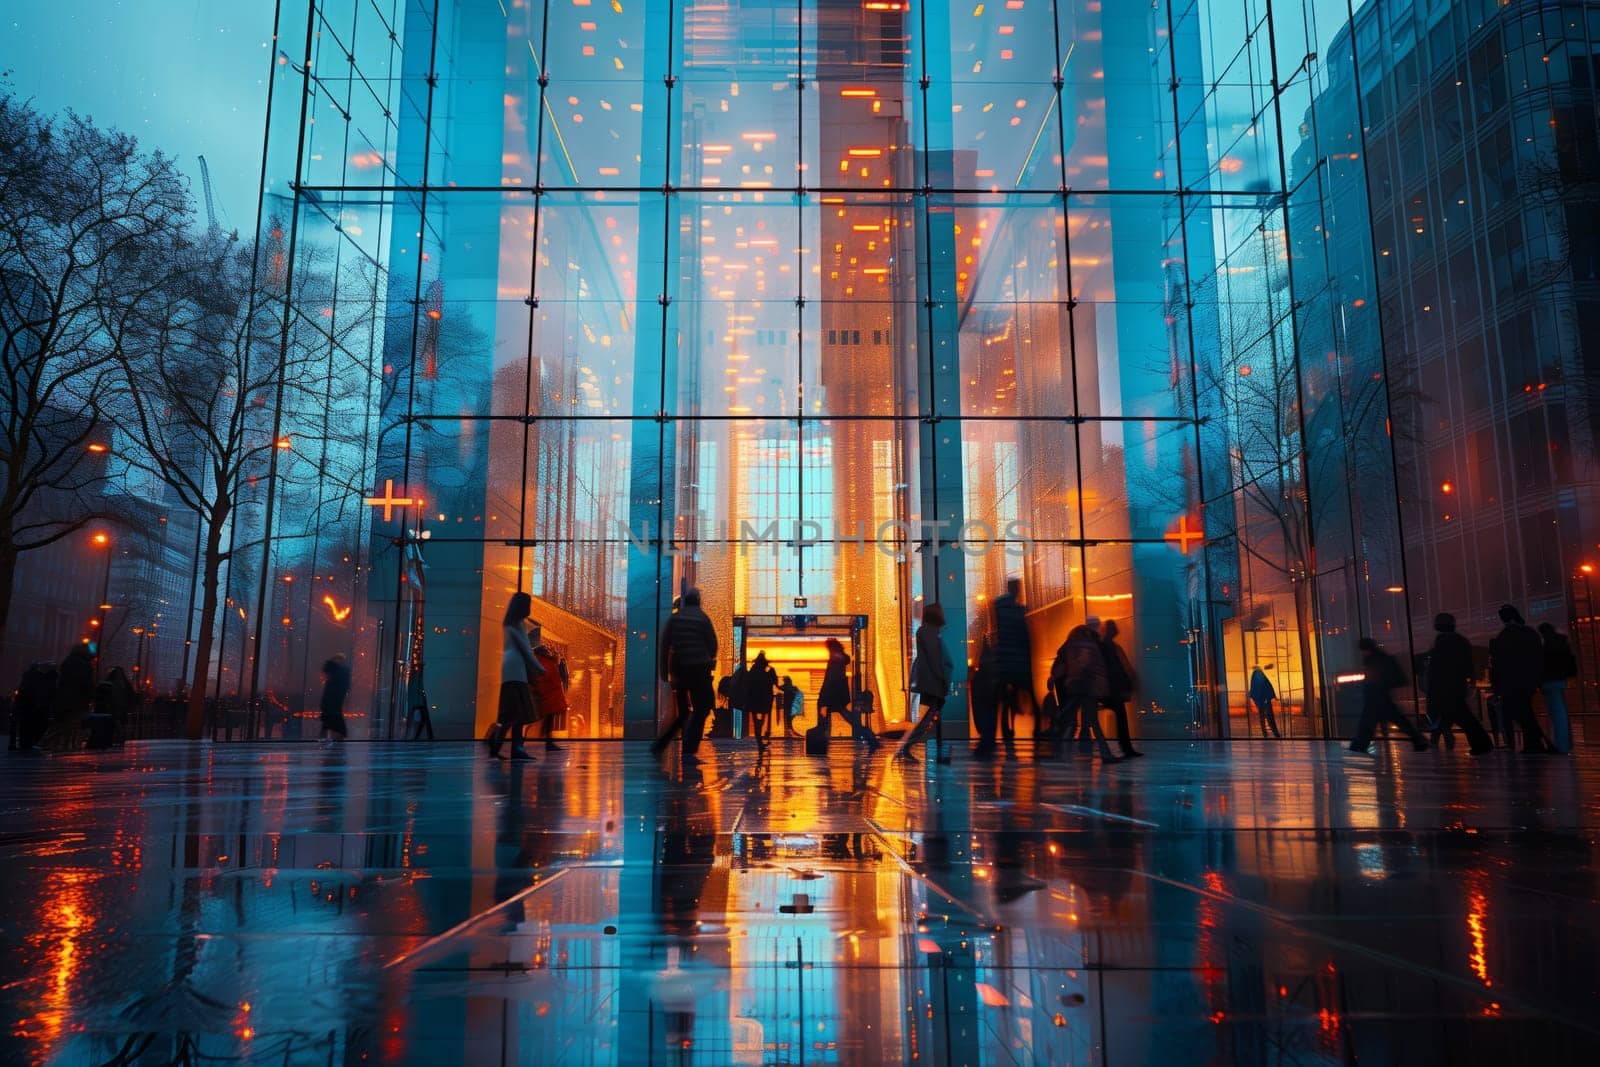 A group of people are strolling in front of a stunning glass building in the city. The facade reflects an electric blue sky, creating a mesmerizing symmetry of art and architecture